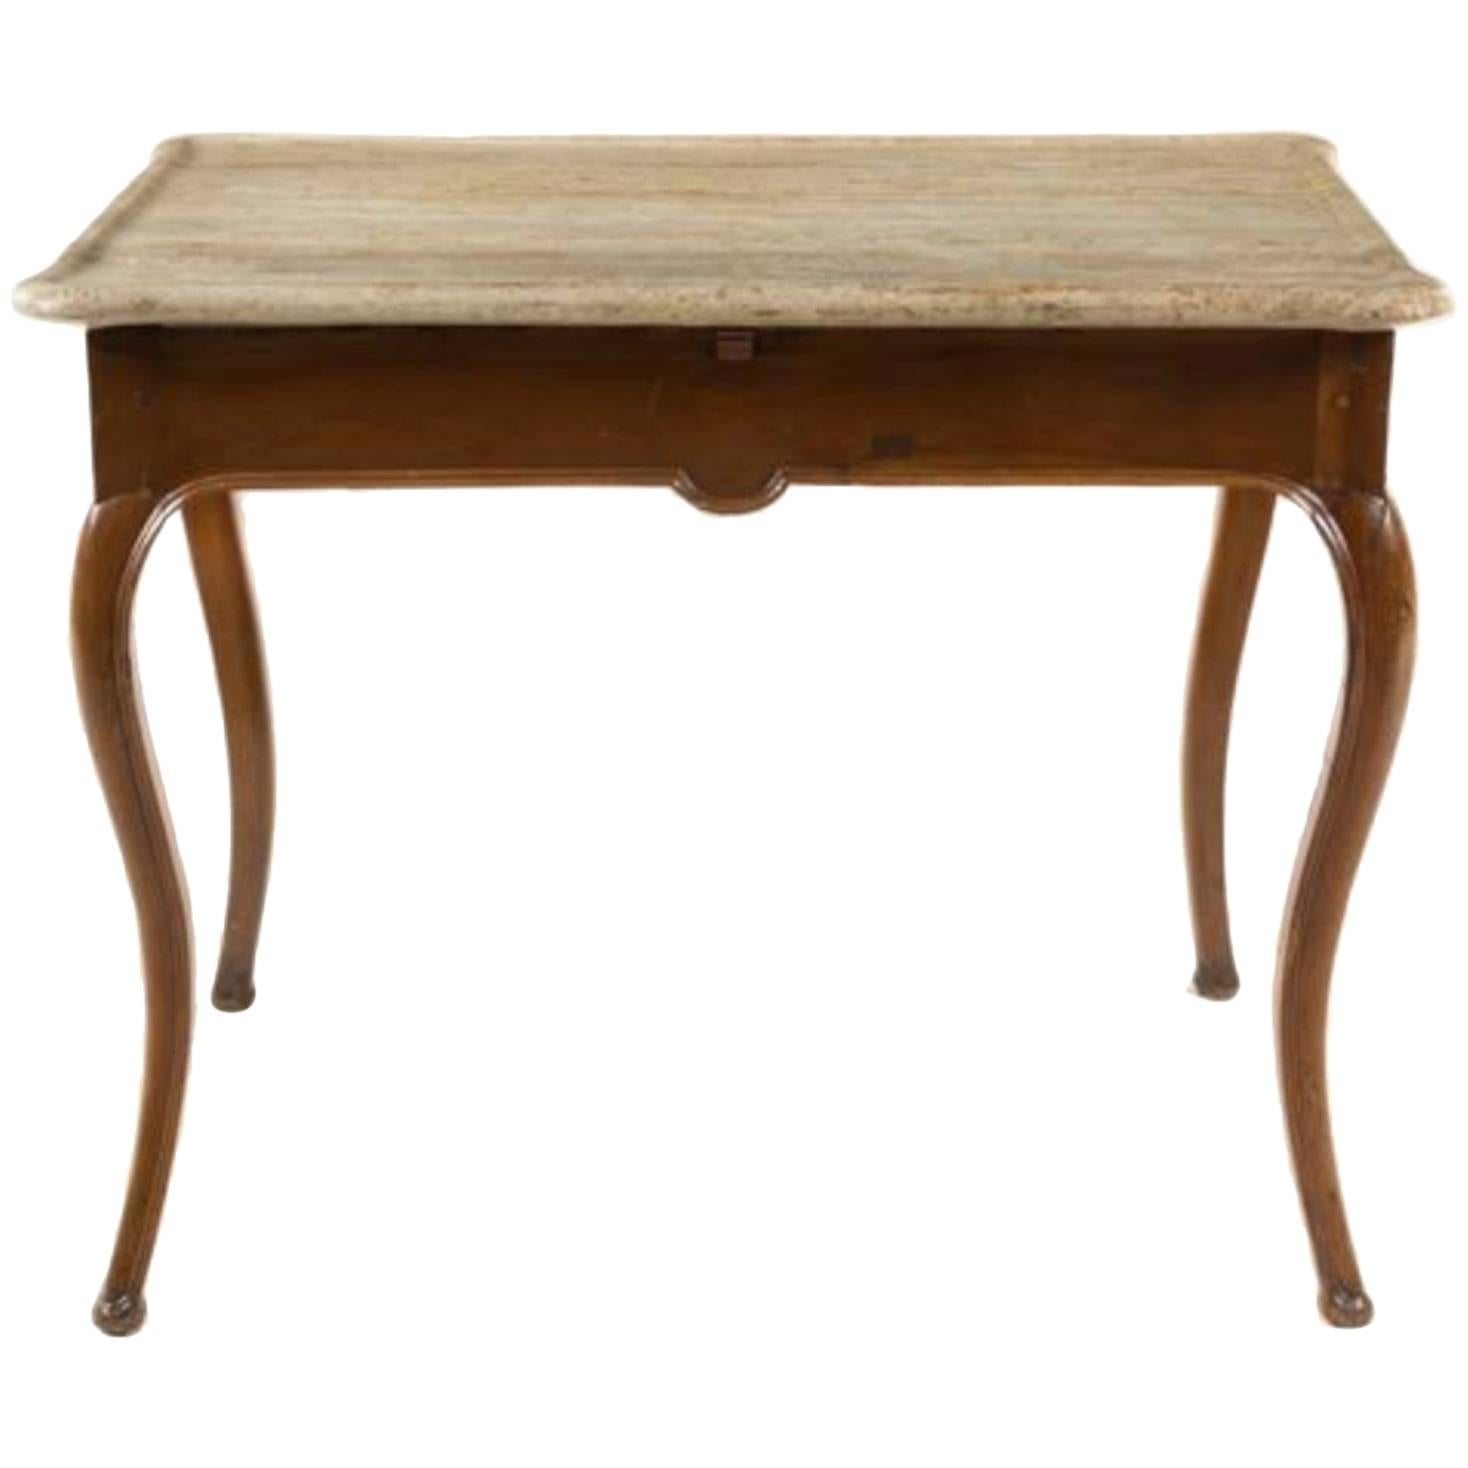 Louis XV Provincial Style Walnut Tea Table with Stone Top, 19th Century For Sale